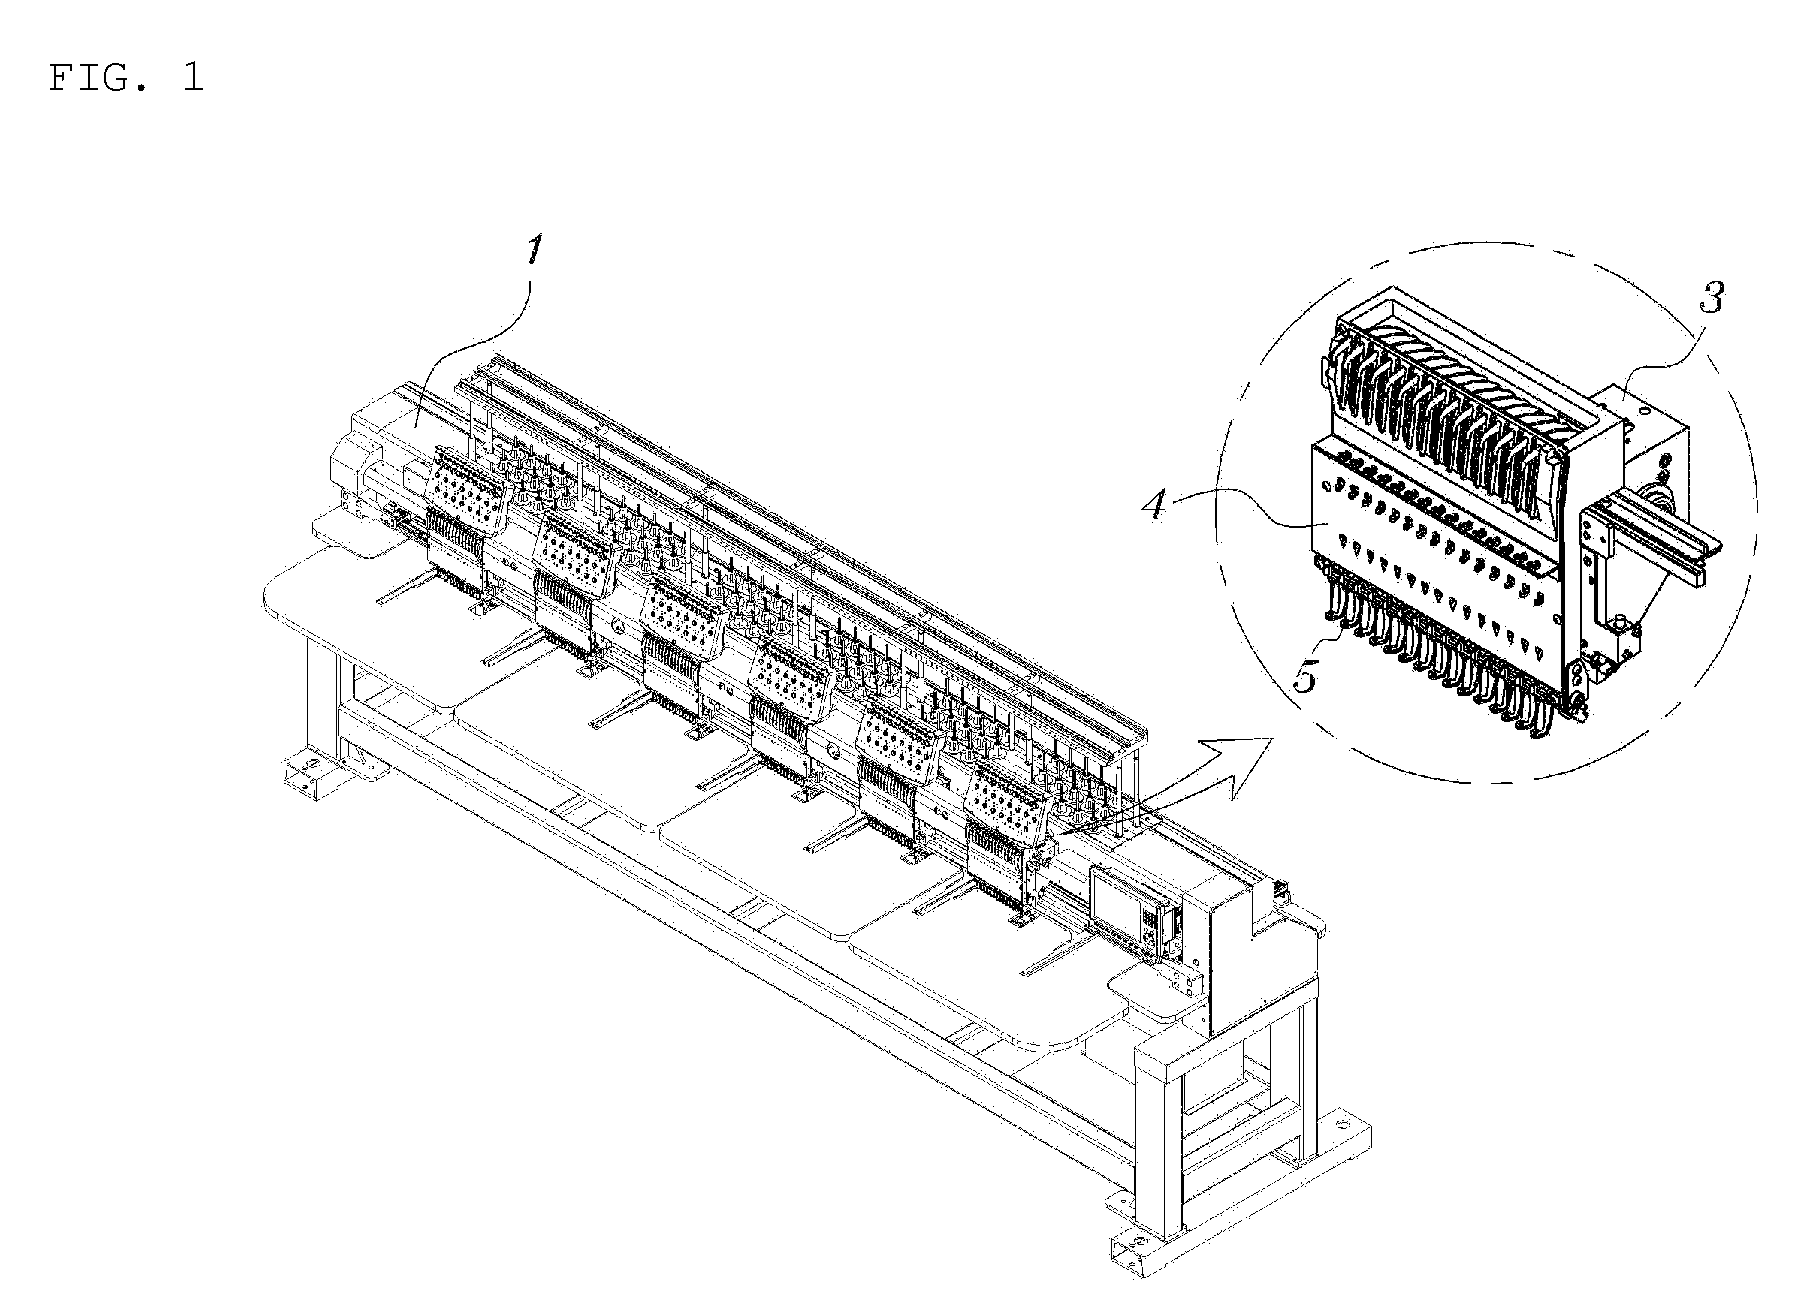 Apparatus for Lifting Presser Foot of Embroidery Machine